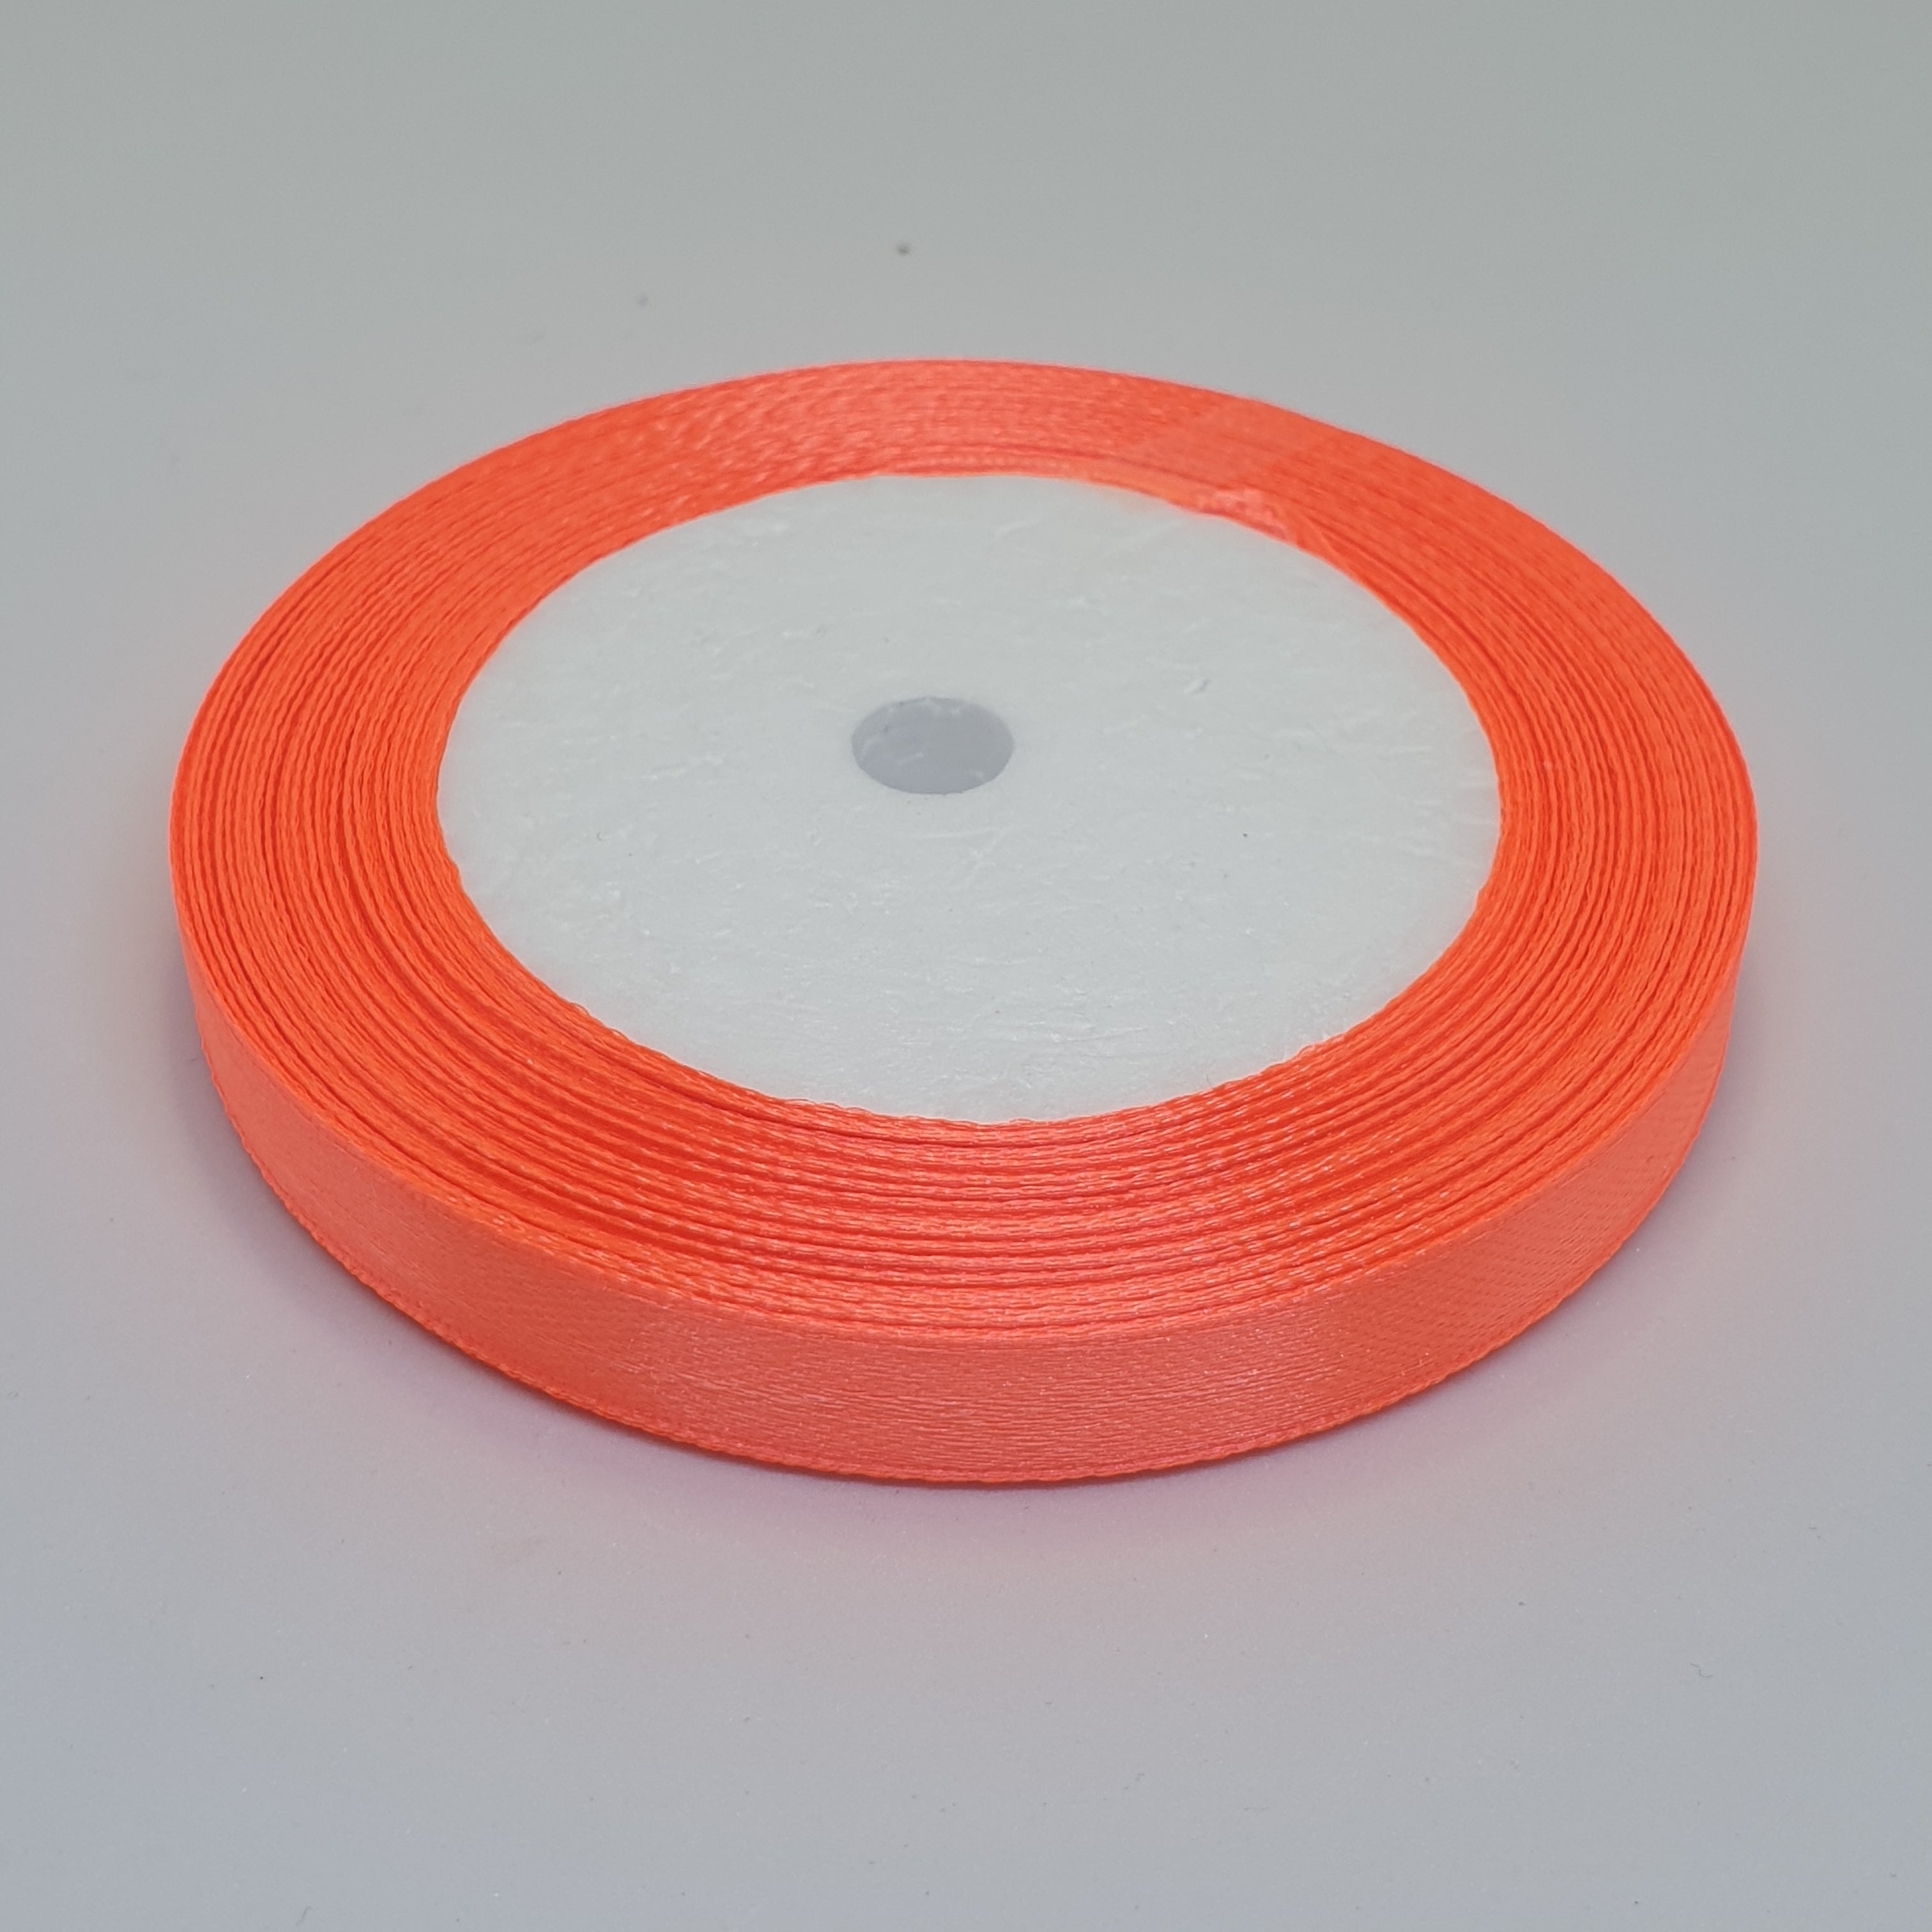 MajorCrafts 10mm 22metres Outrageous Orange Single Sided Satin Fabric Ribbon Roll R23